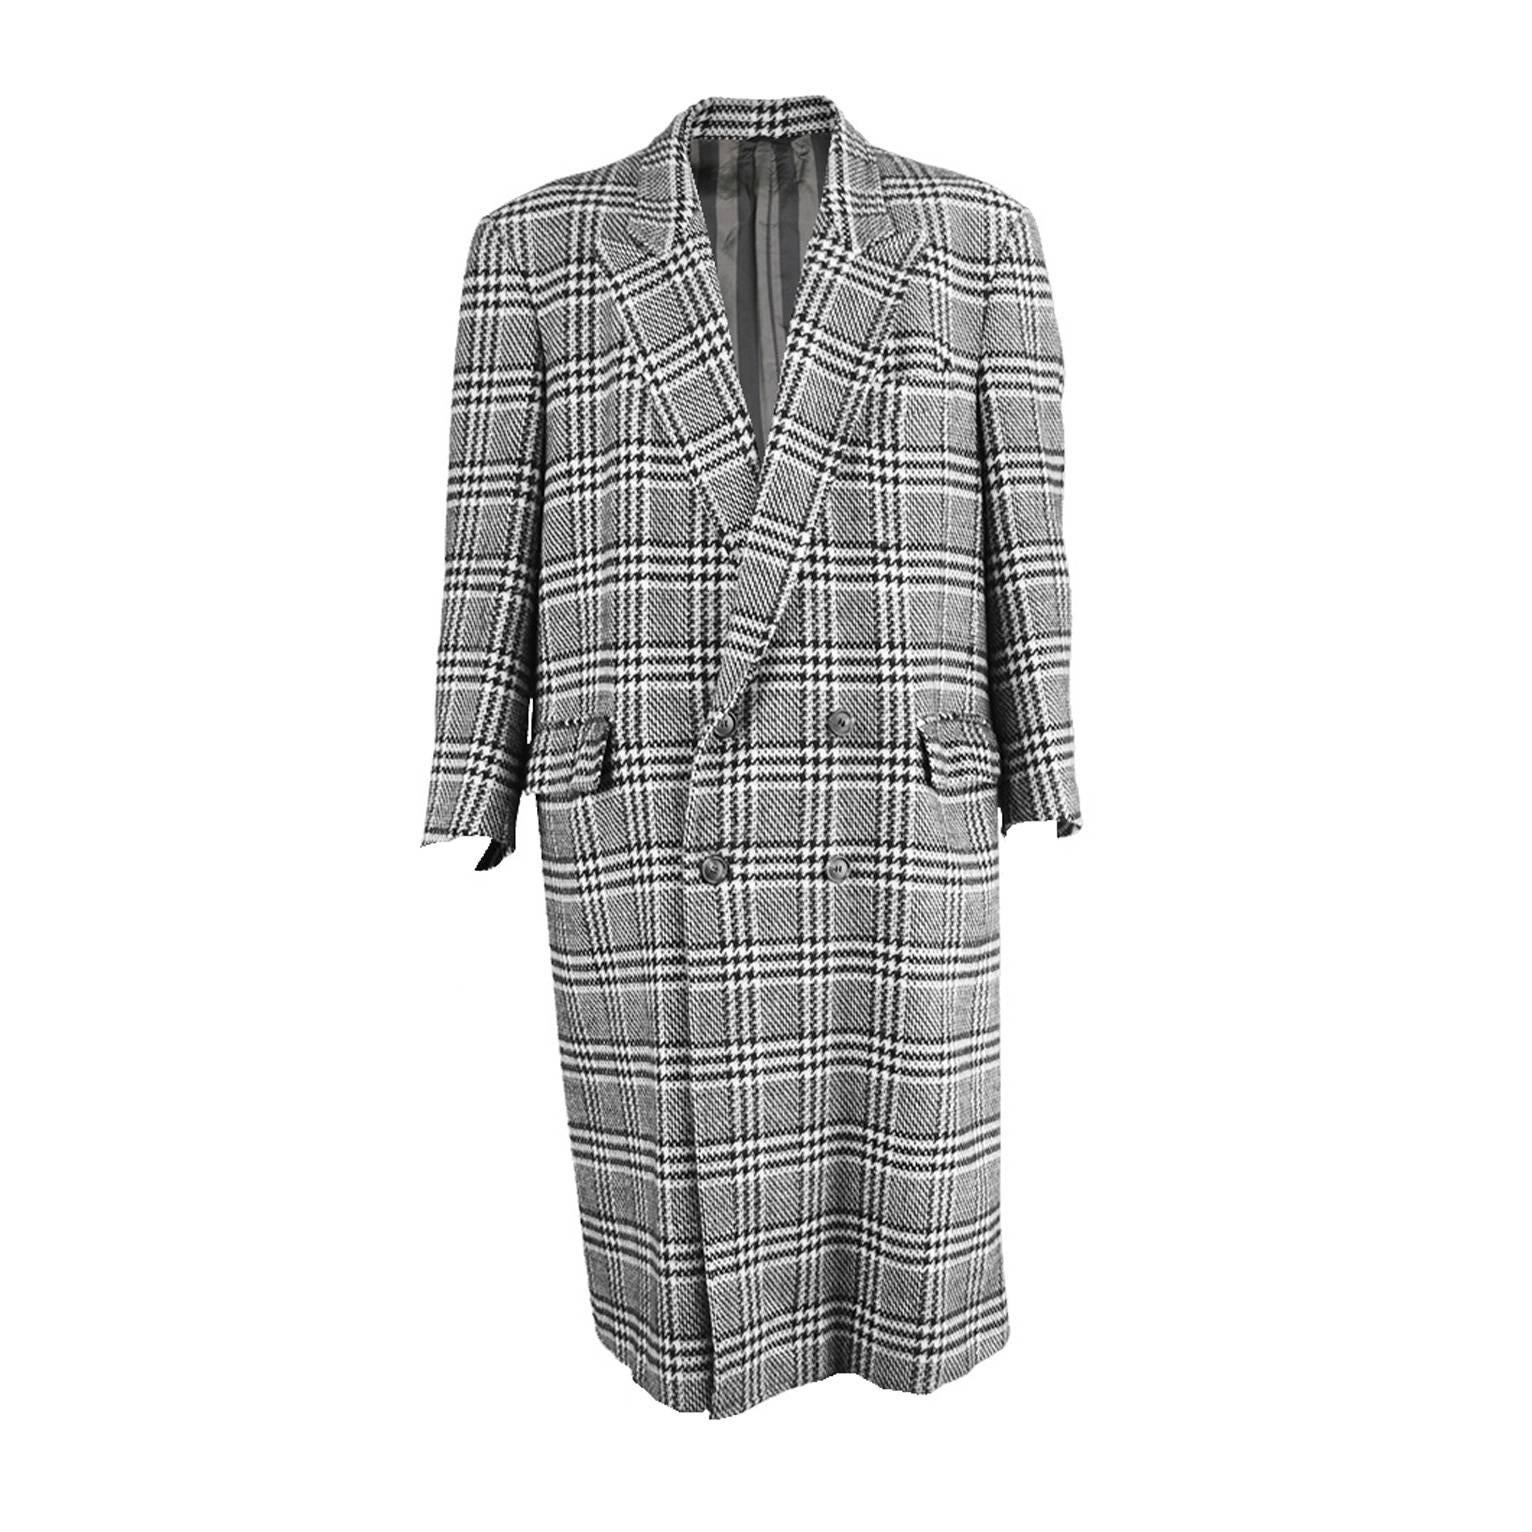 Cacharel 1980s Mens Oversized Monochrome Prince of Wales Check Overcoat